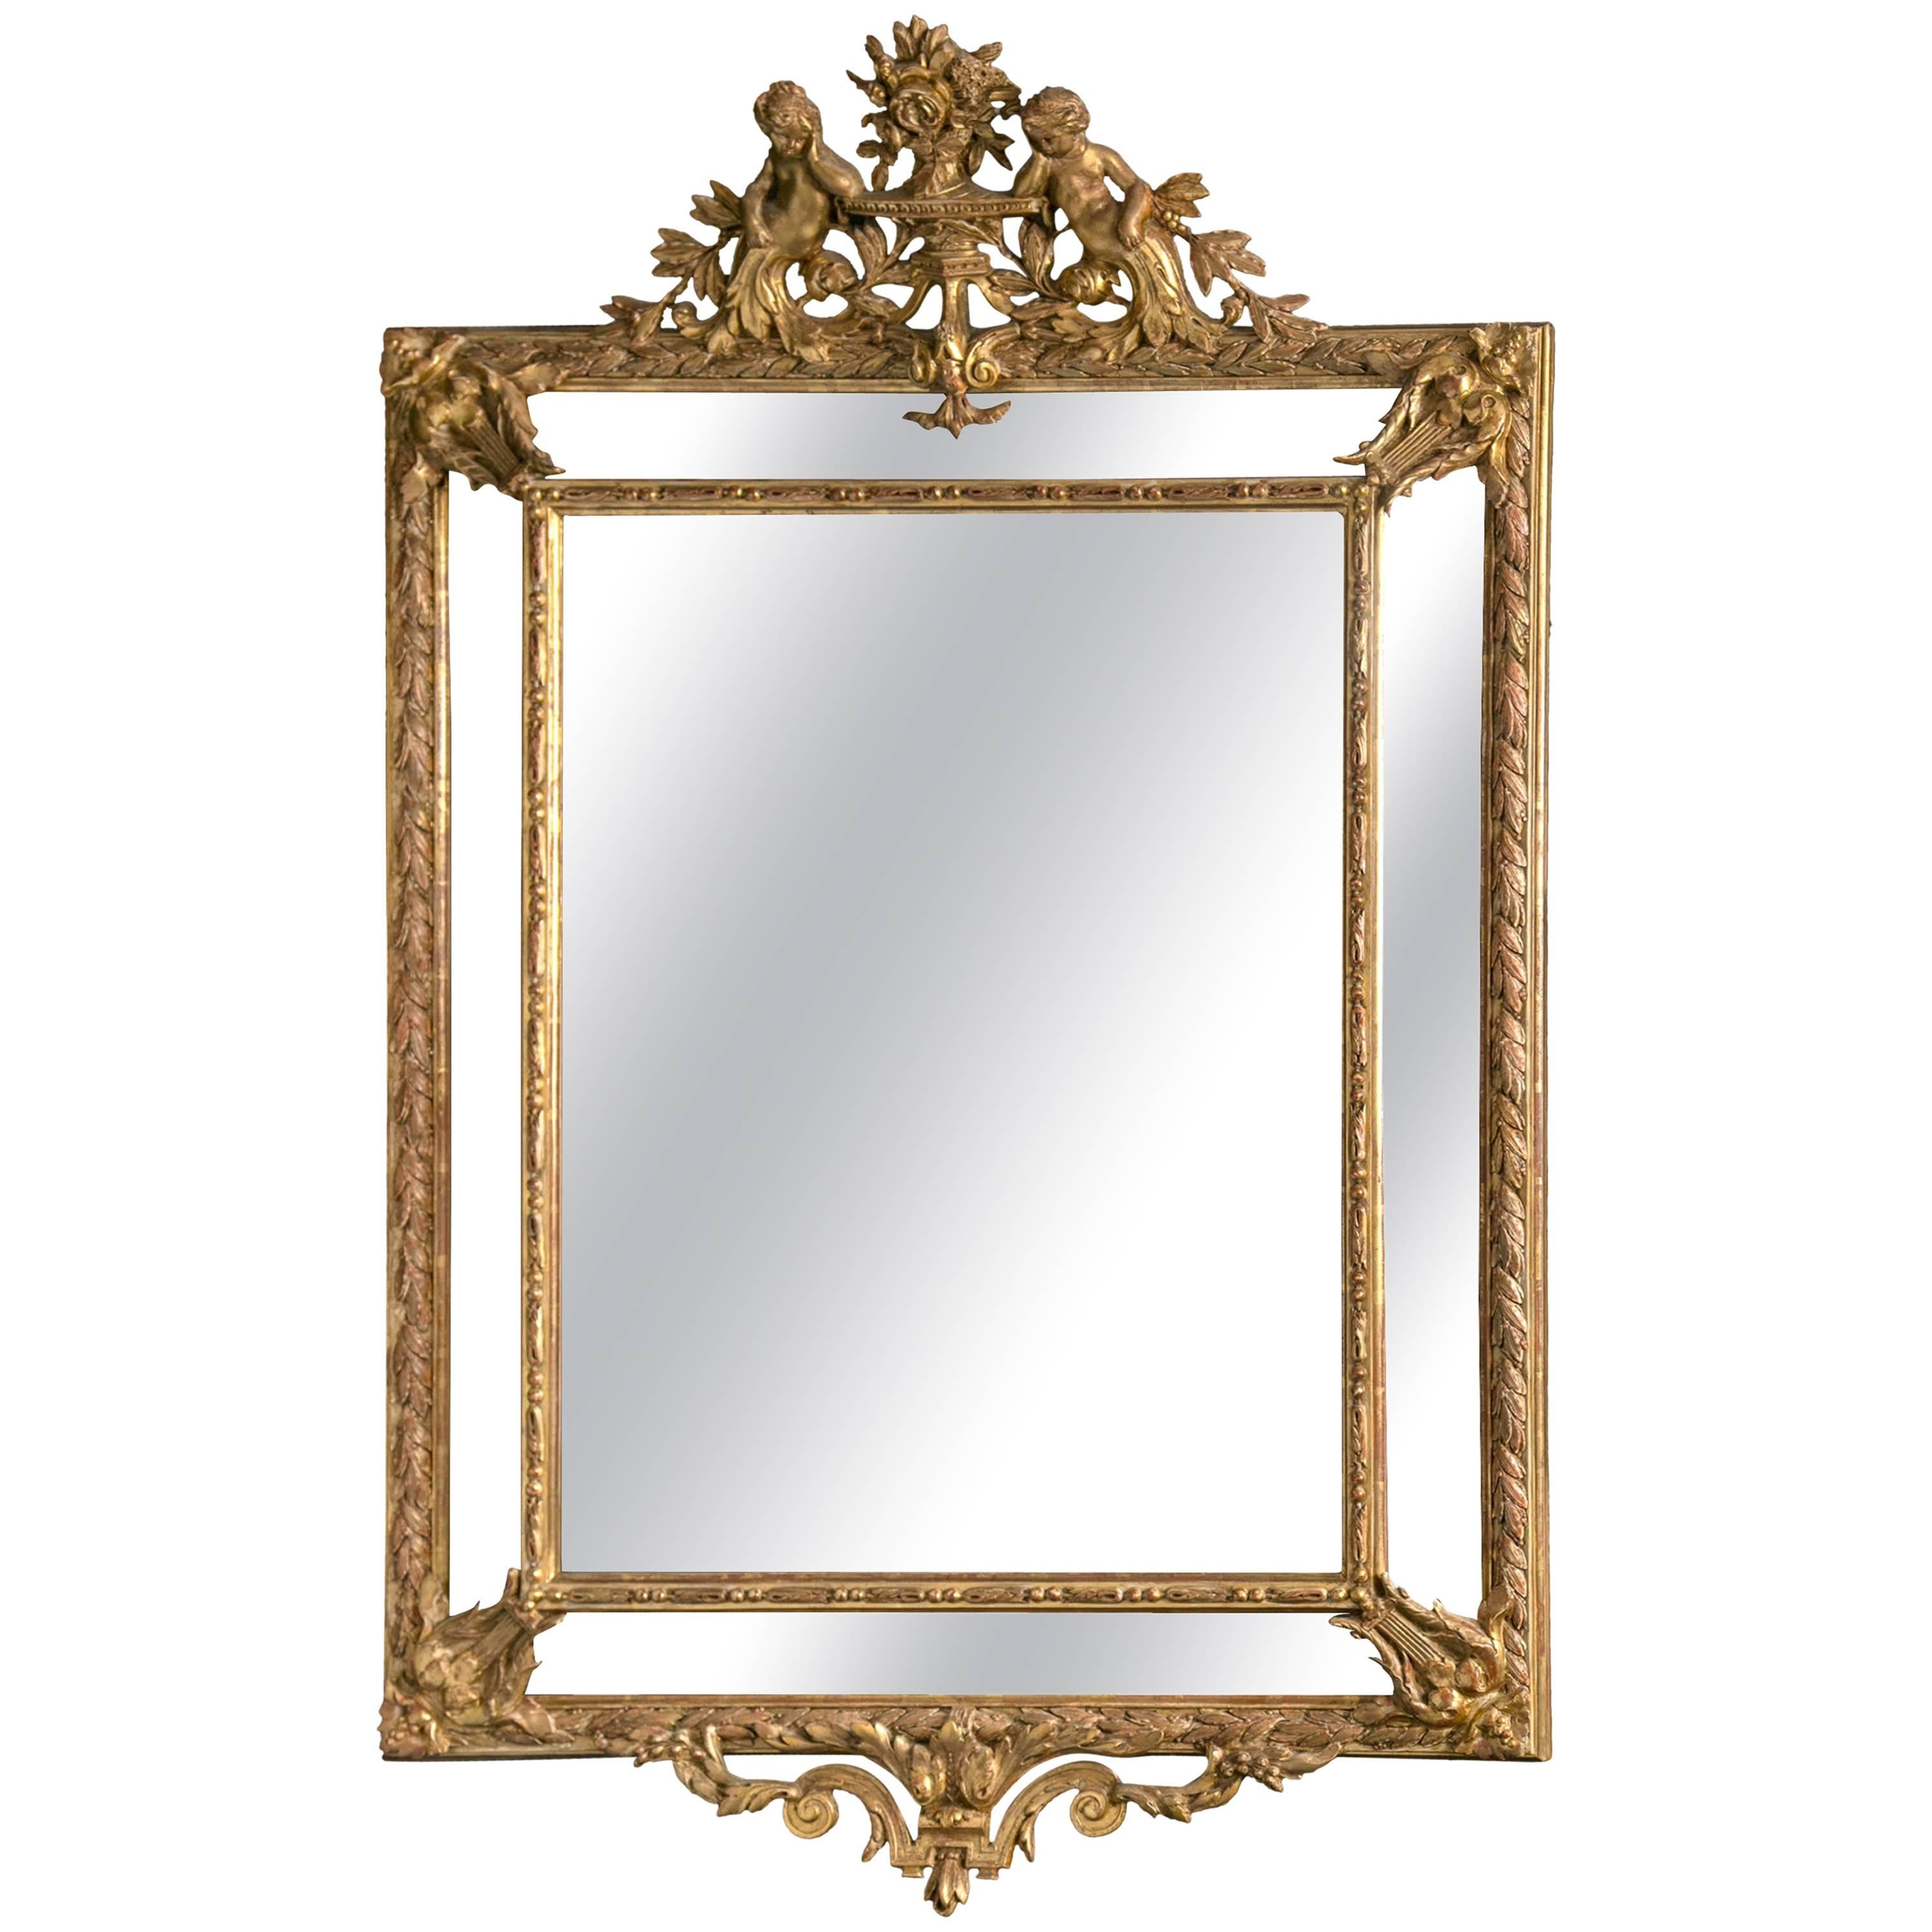 Exquisite Giltwood Mirror For Sale